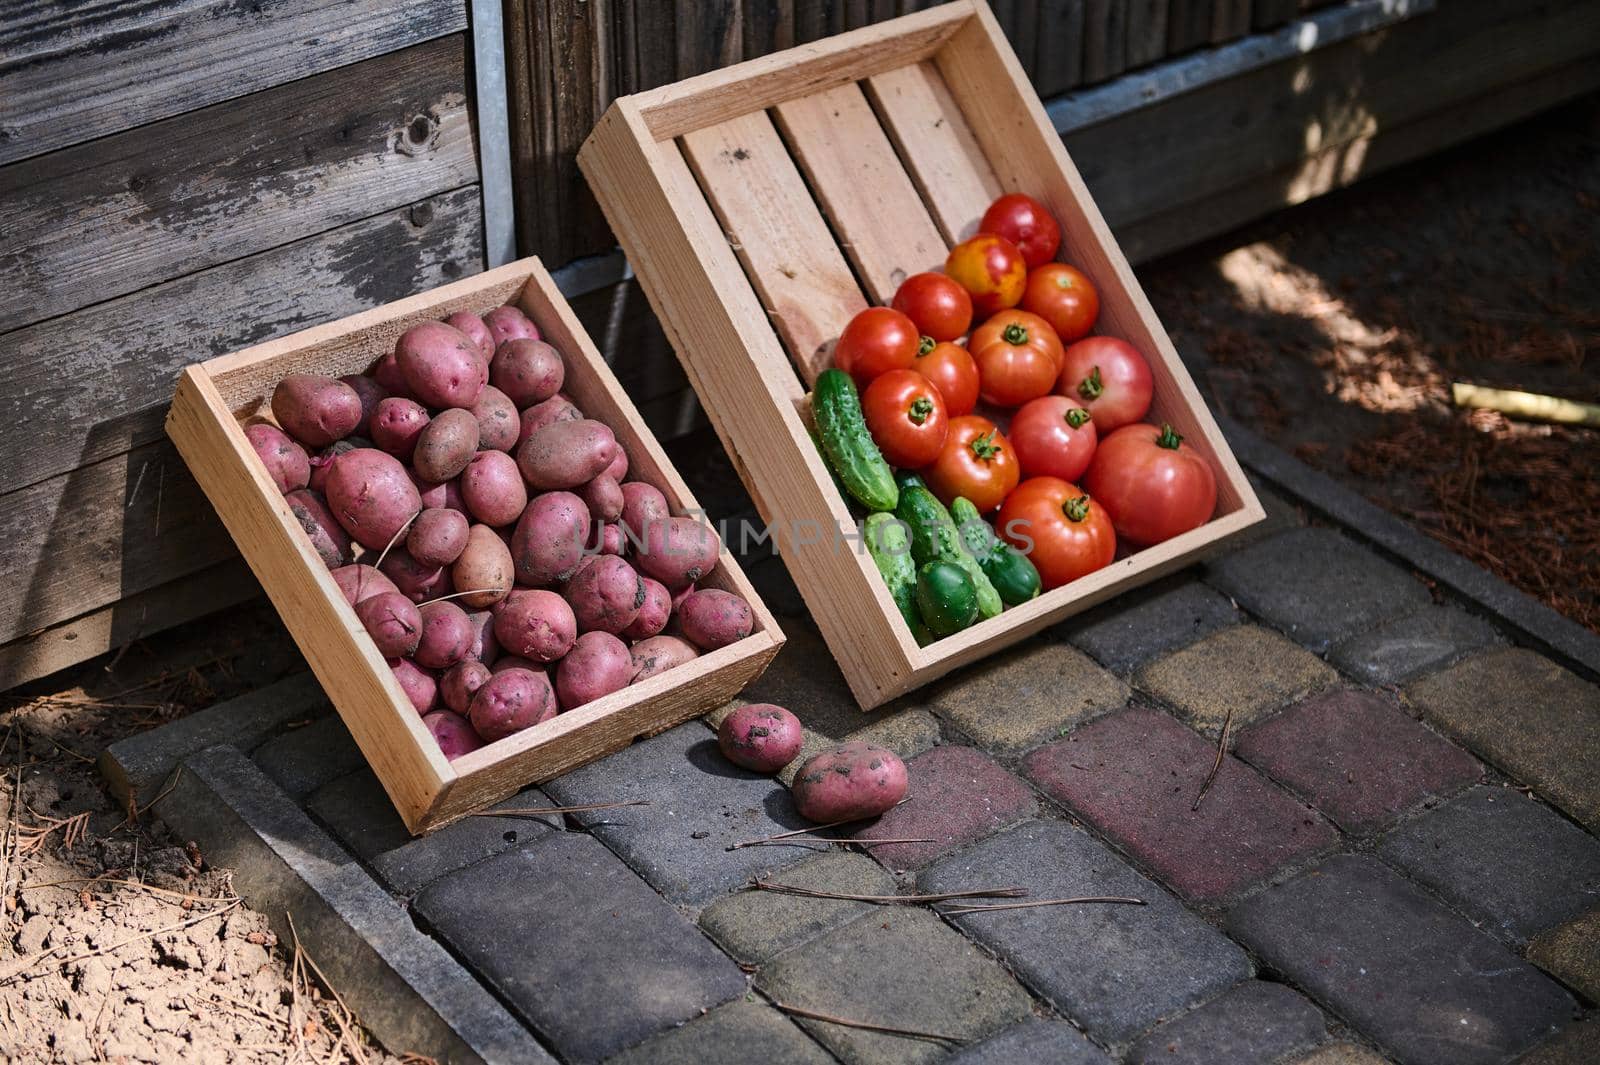 Harvested crop of organic vegetables cultivated in an eco farm: cucumbers, ripe tomatoes and pink potatoes in wooden box by artgf